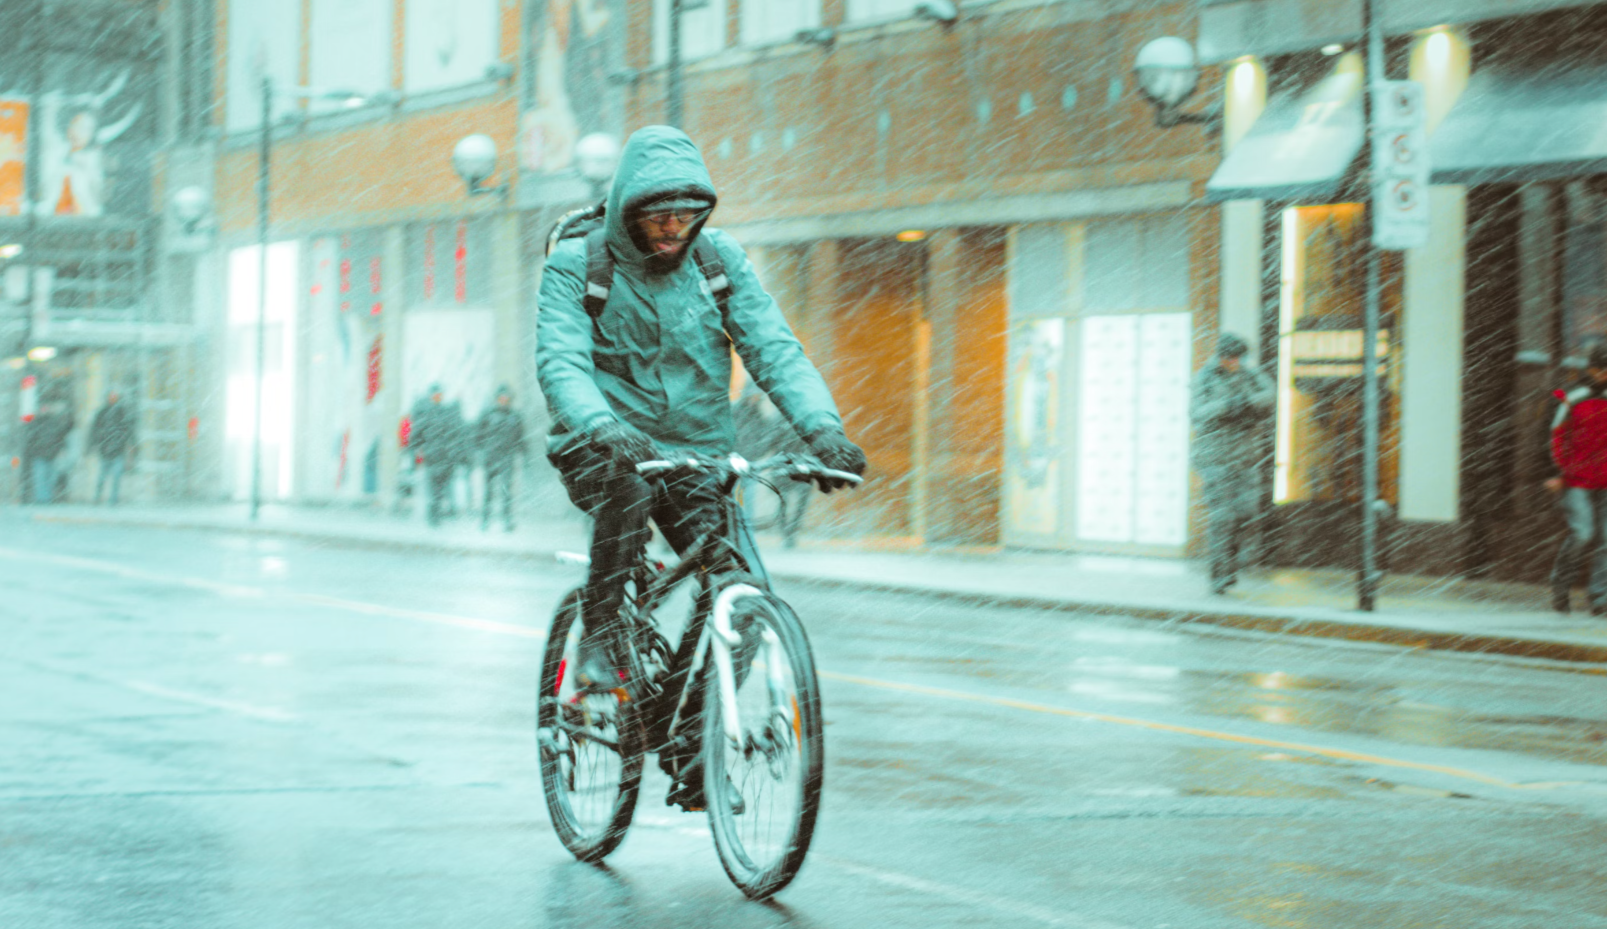 What to Say When Someone Claims ‘No One Bikes or Walks in Bad Weather’